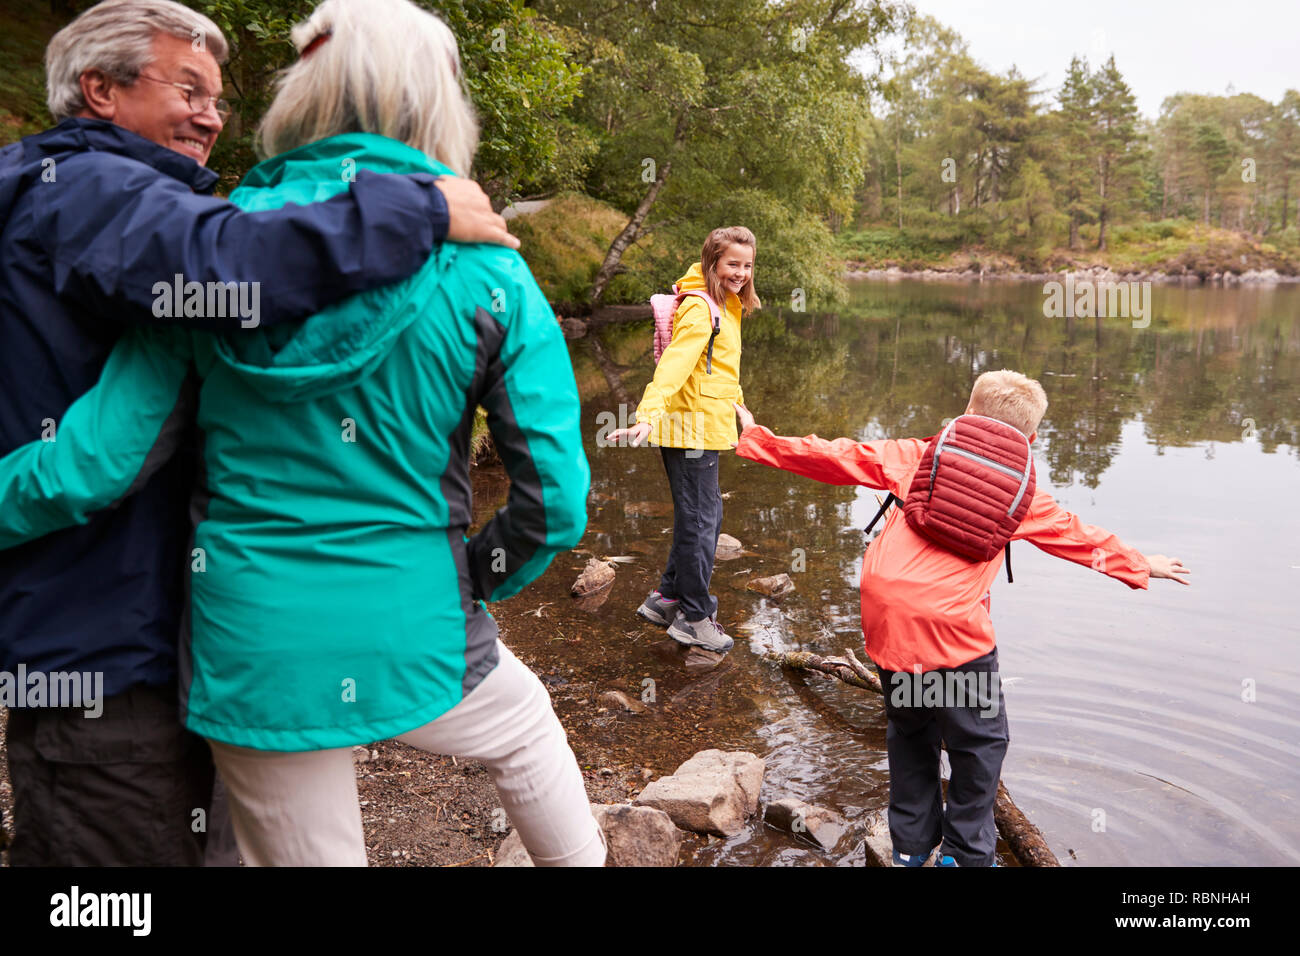 Two children playing at the shore of a lake, their grandparents in the foreground, Lake District, UK Stock Photo